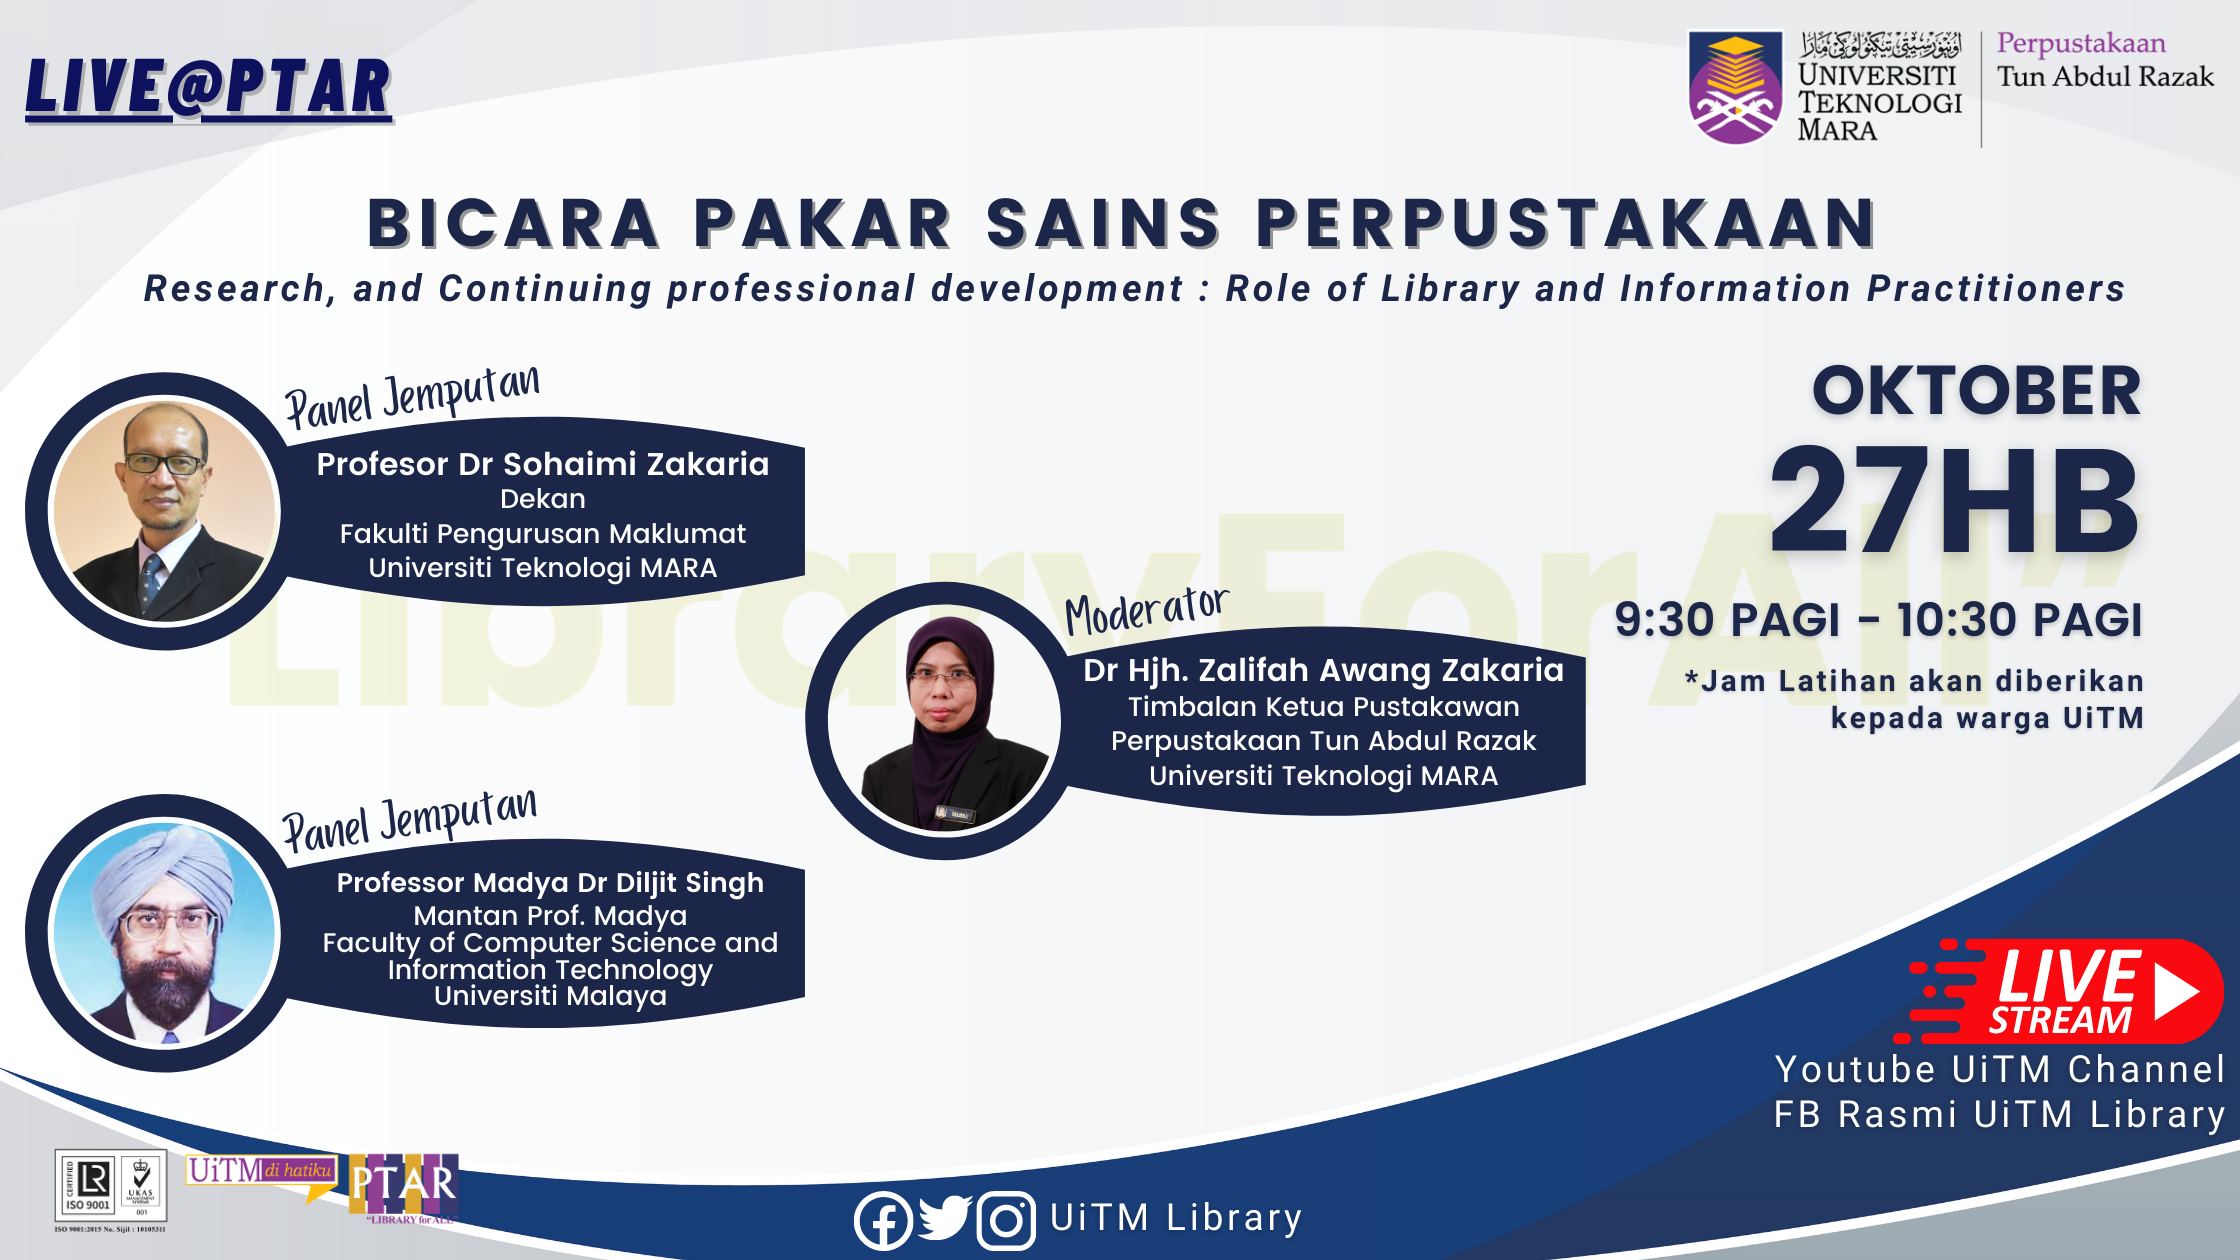 Bicara Pakar: Sains Perpustakaan - Research, and Continuing professional development : Role of Library and Information Practitioners